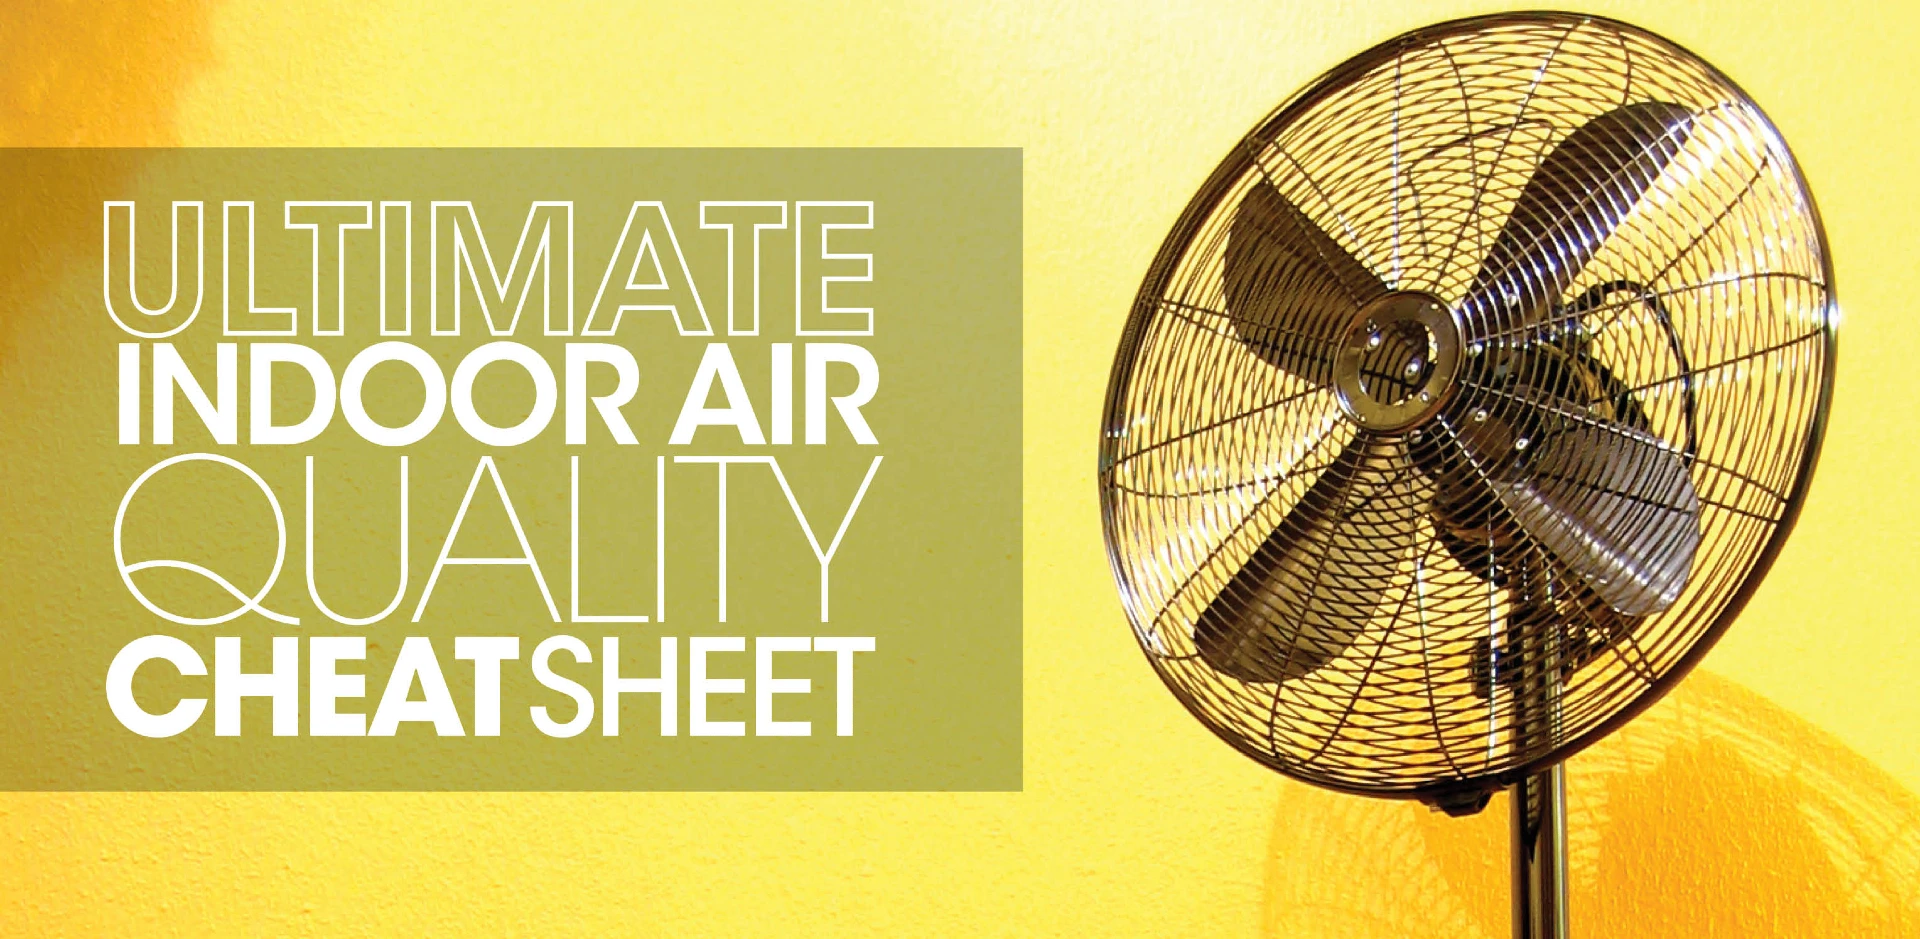 Ultimate Indoor Air Quality Cheat Sheet - black fan